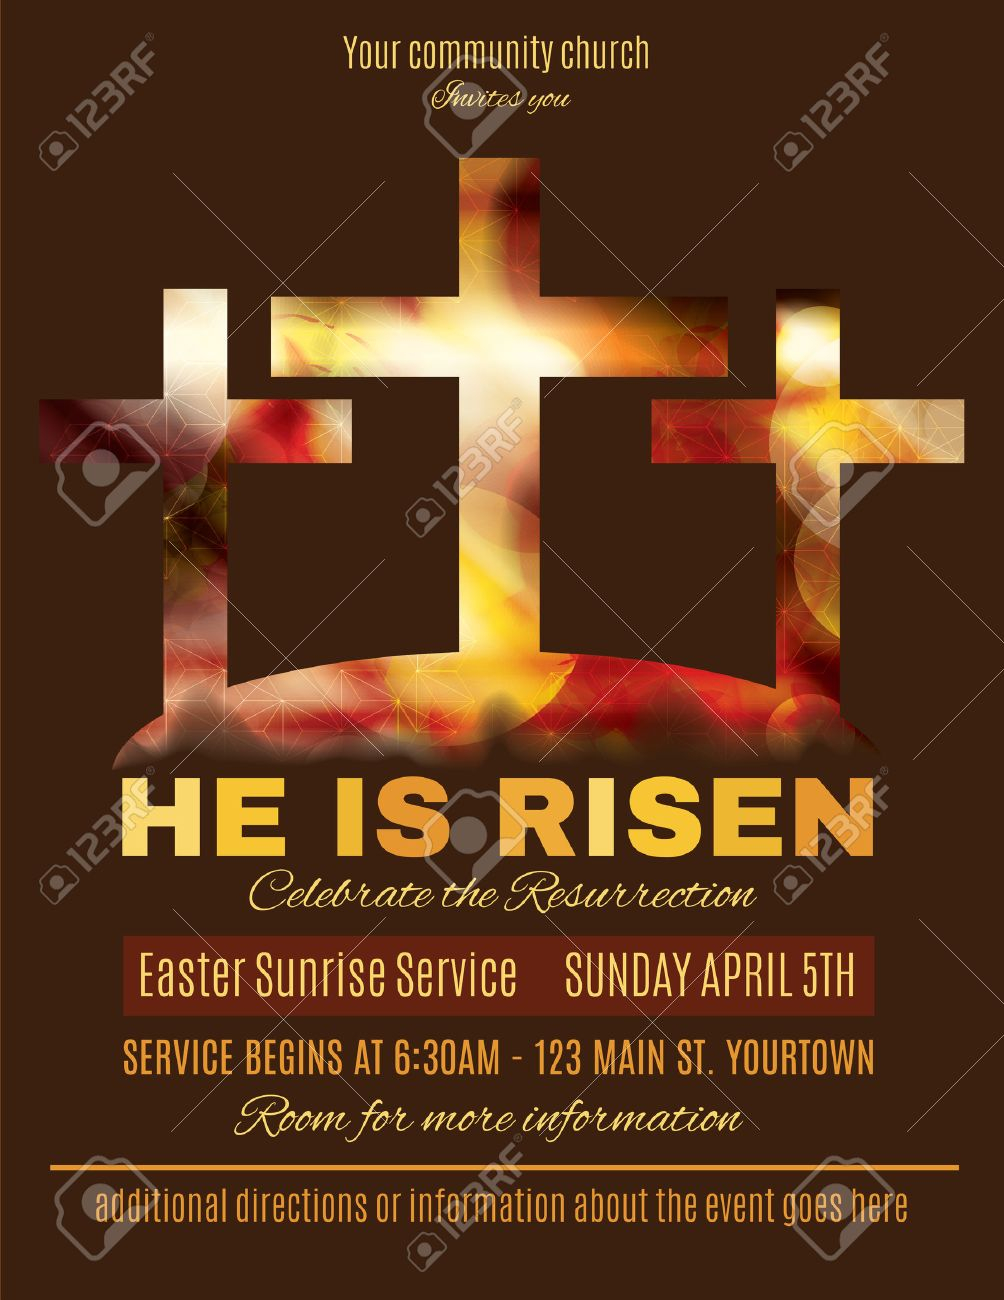 He Is Risen Easter Sunrise Service Flyer Template Intended For Easter Church Flyer Template